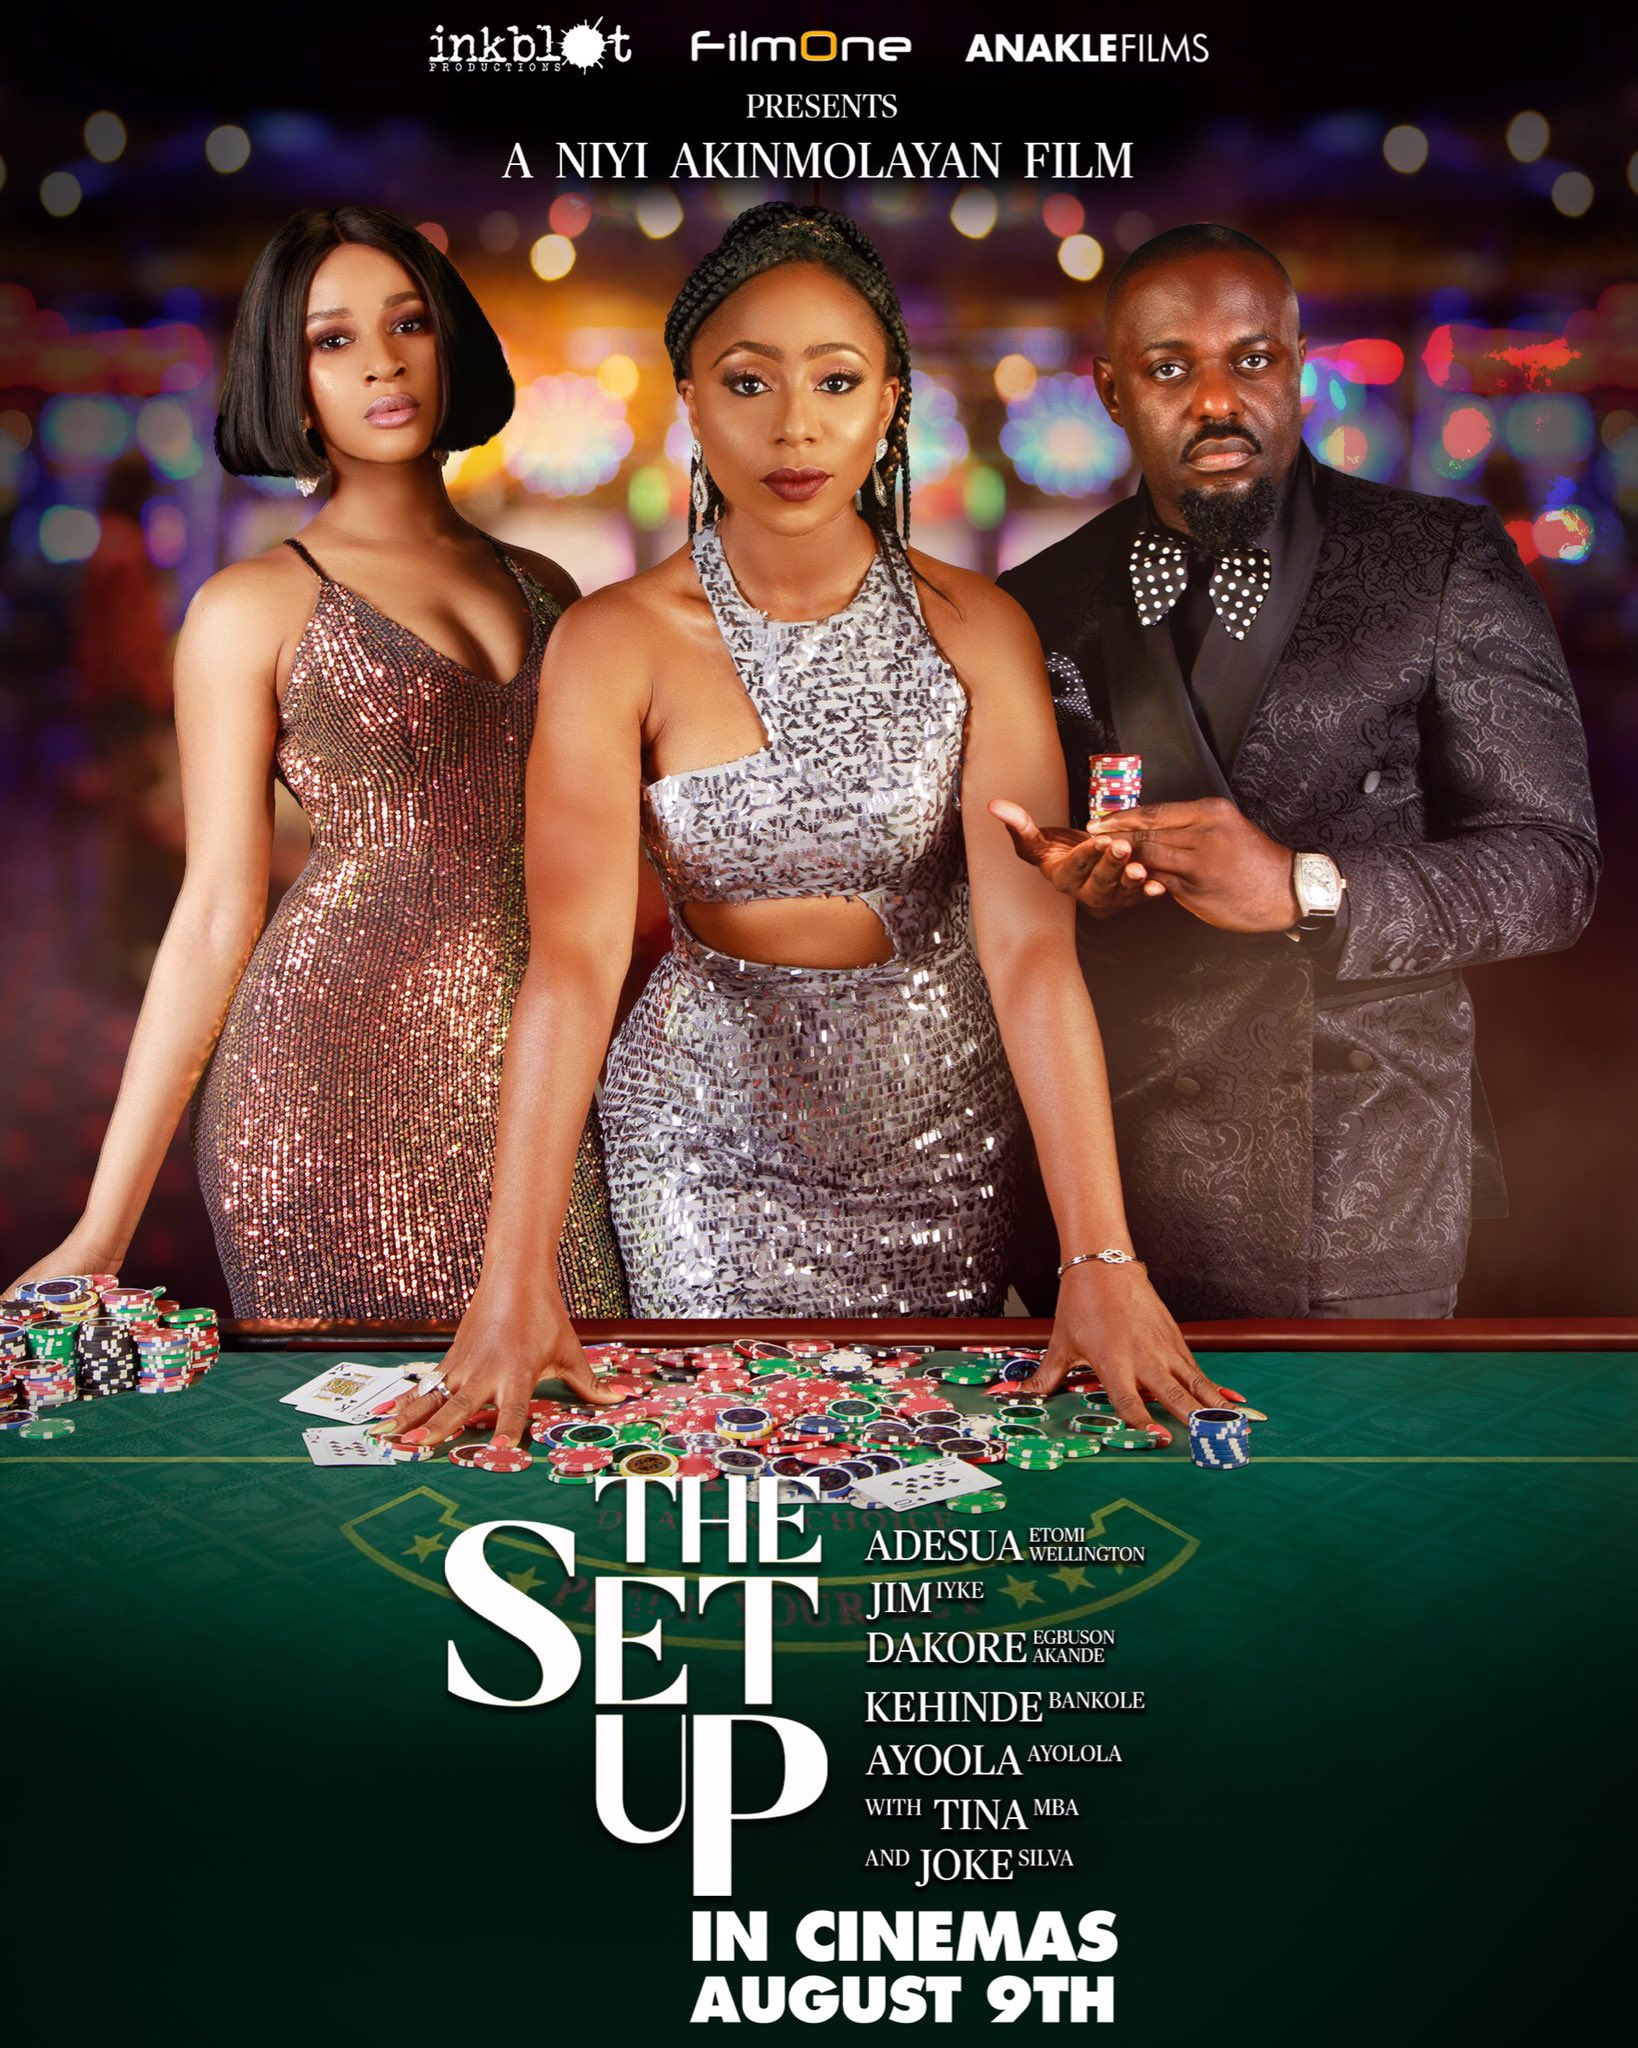 poster tsf - Niyi Akinmolayan Teams with Inkblot Productions for ''The setup film'' Too much Juice or too much Sauce??